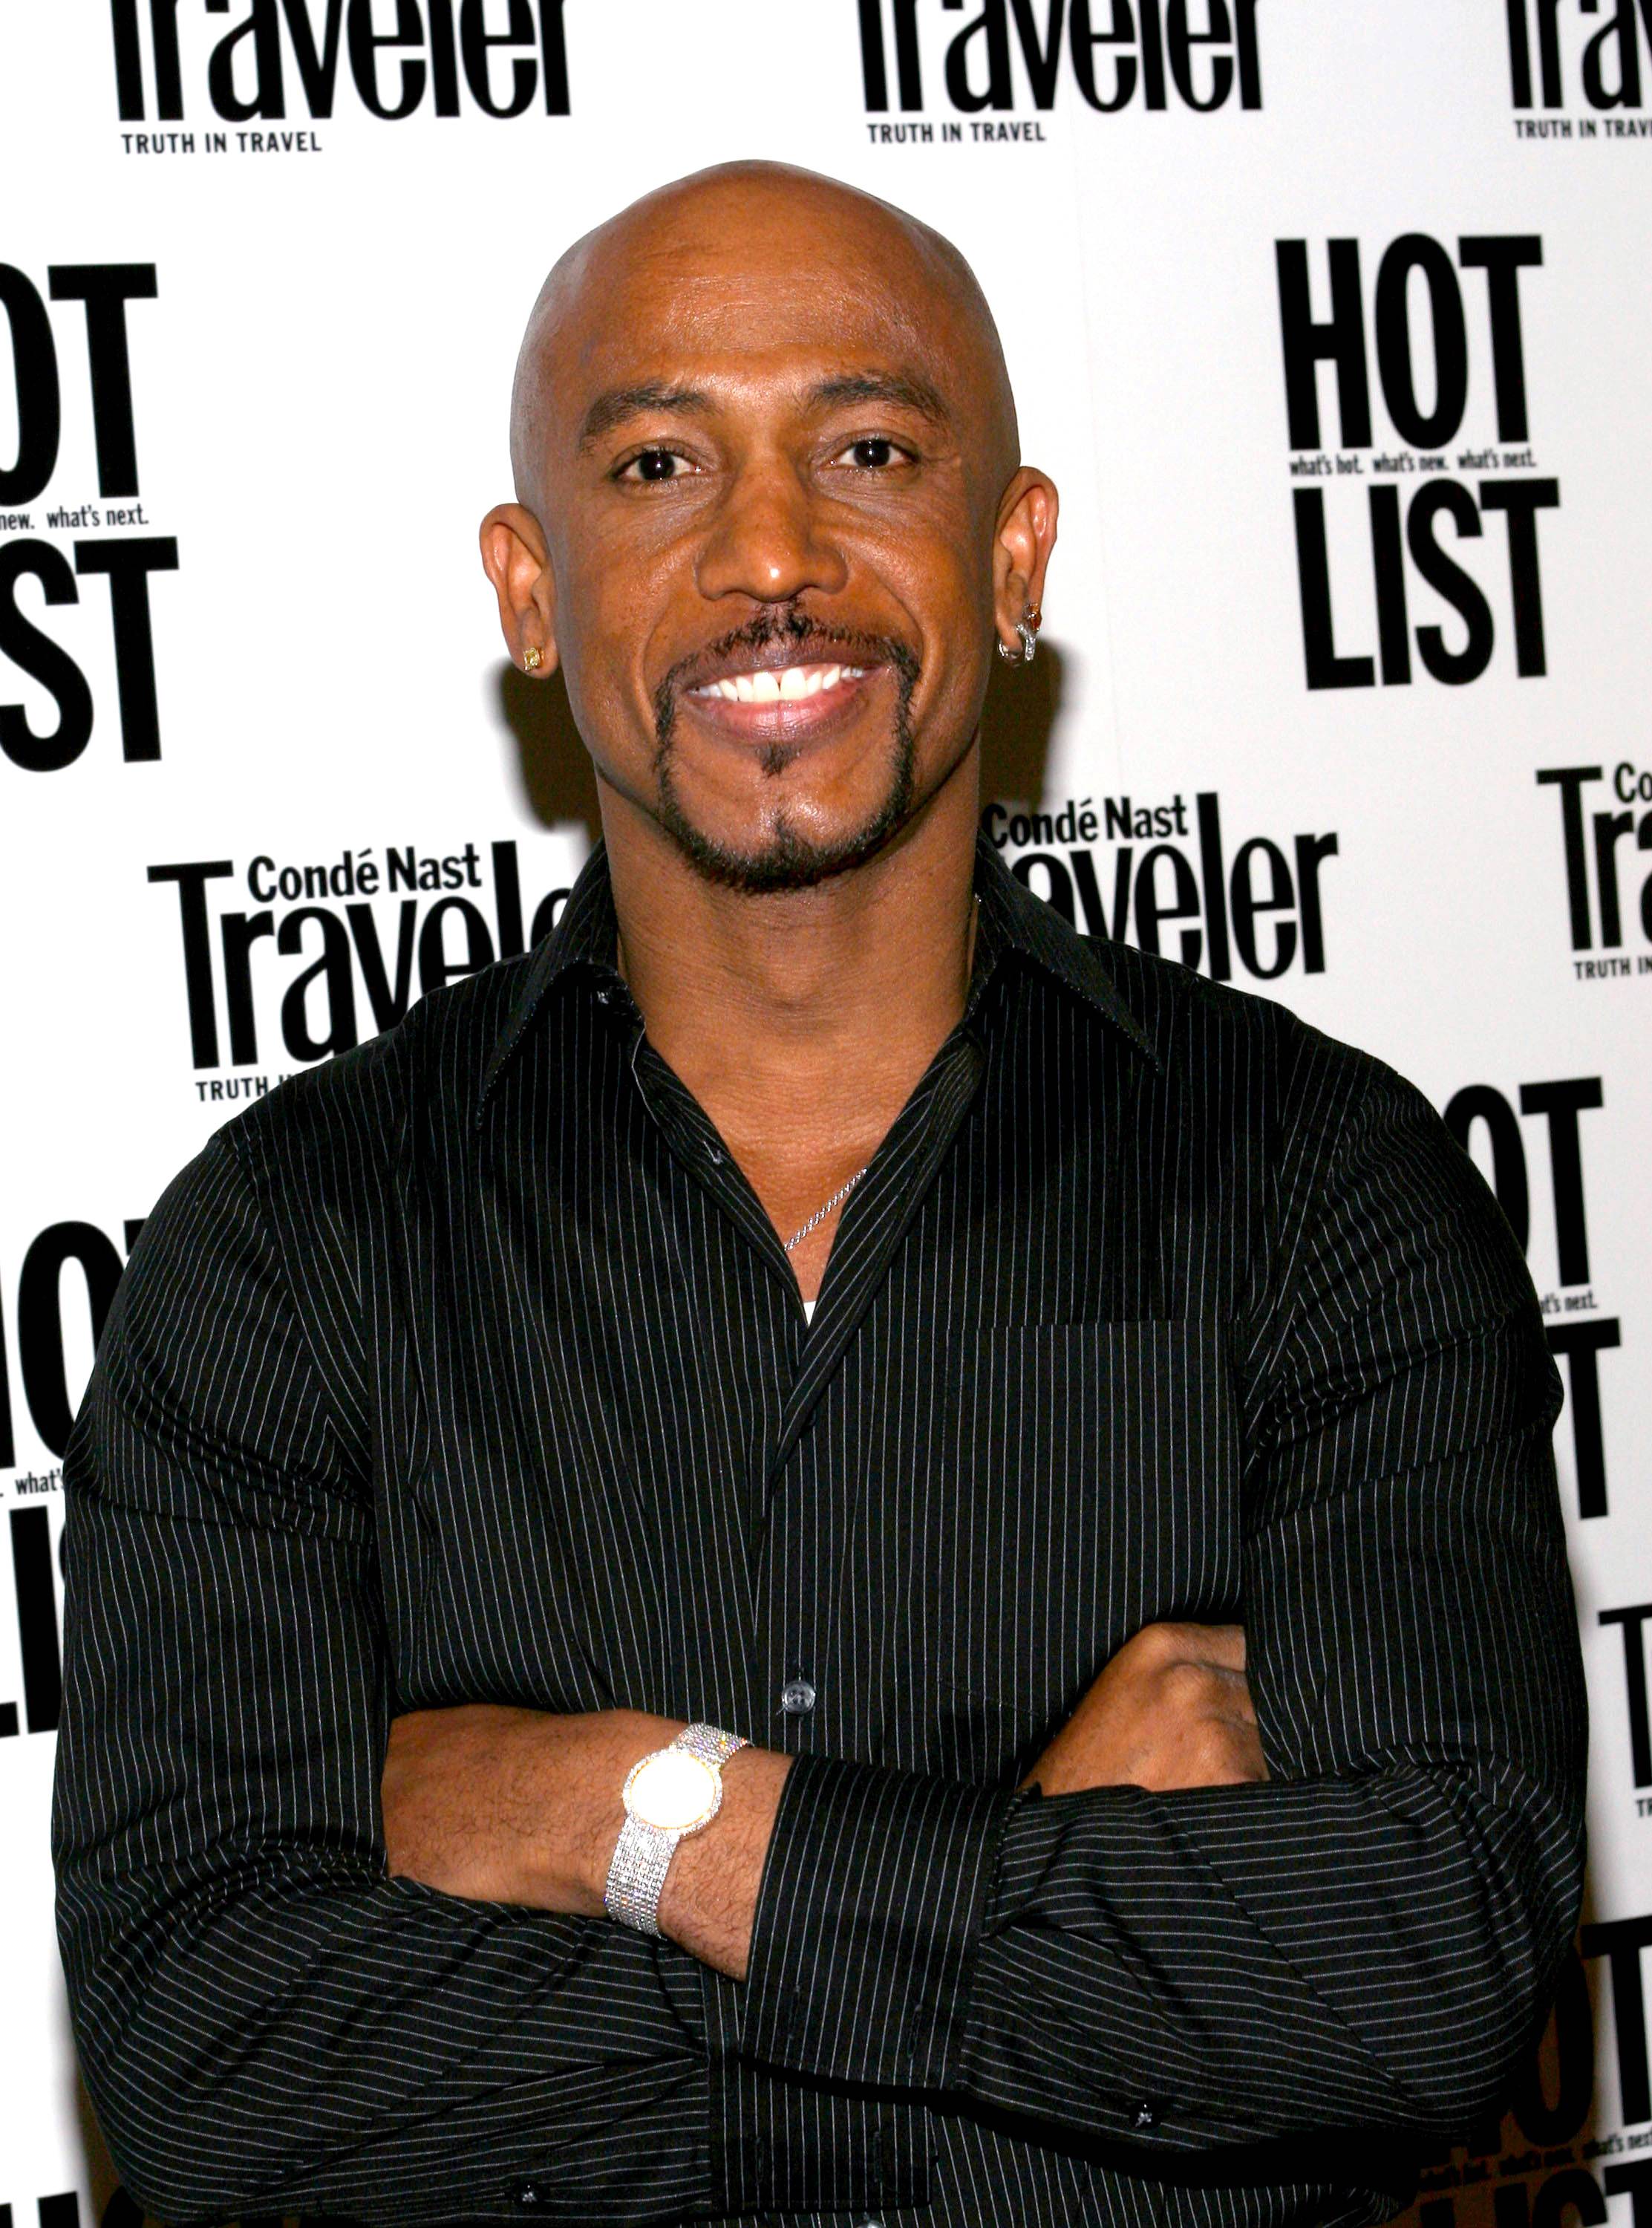 Montell Williams: The Montell Williams Show - Next to Oprah, Montell Williams is the second African-American to have a long-running (17 years) talk show. Starting around the same time as Jerry Springer, Williams’s show aimed to be racy but not as exploitive.(Photo: Scott Wintrow/Getty Images)